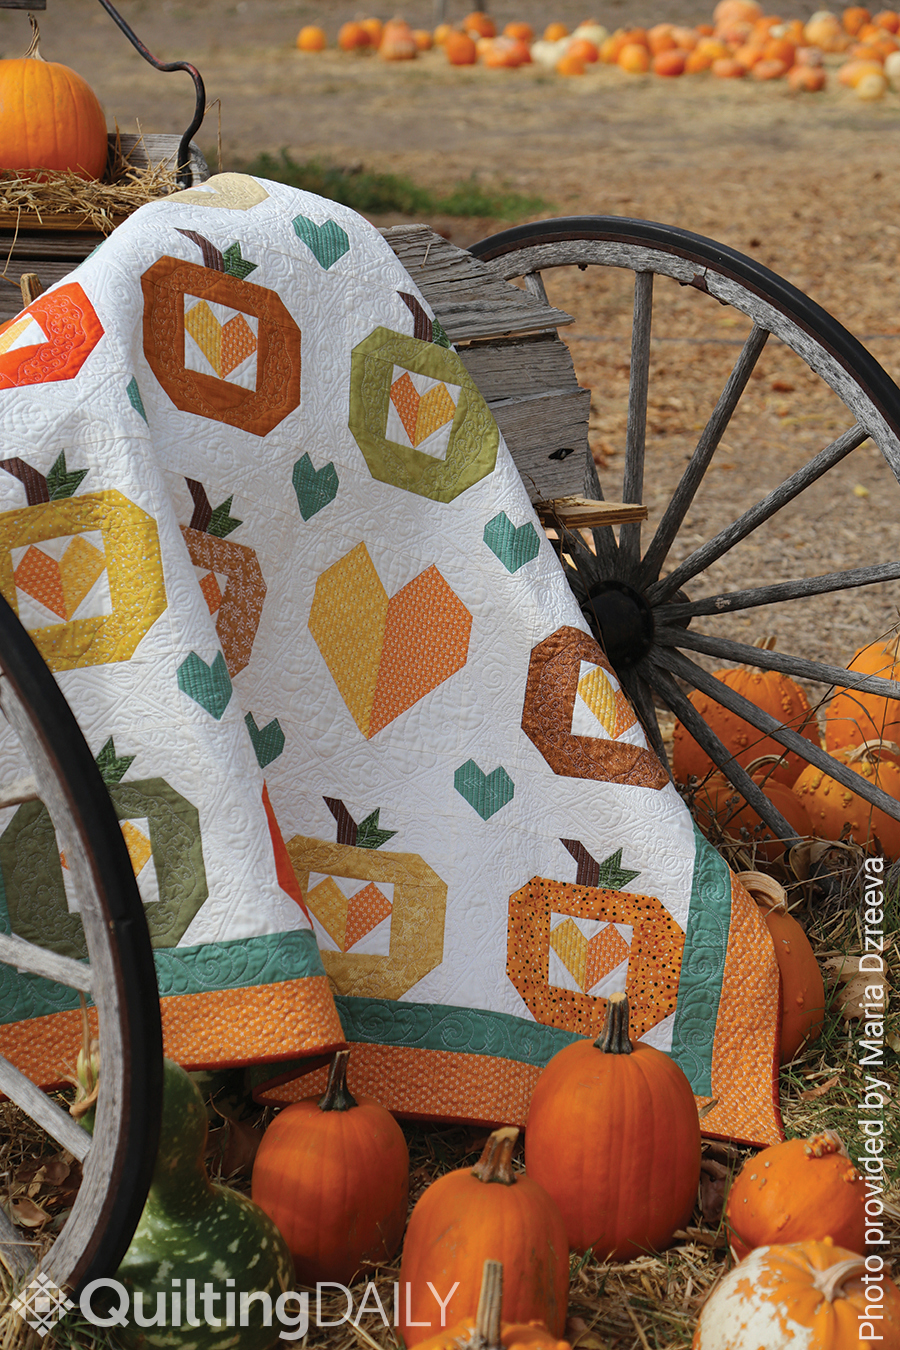 Free quilt pattern: Harvest Time - zoomed in view of the quilt